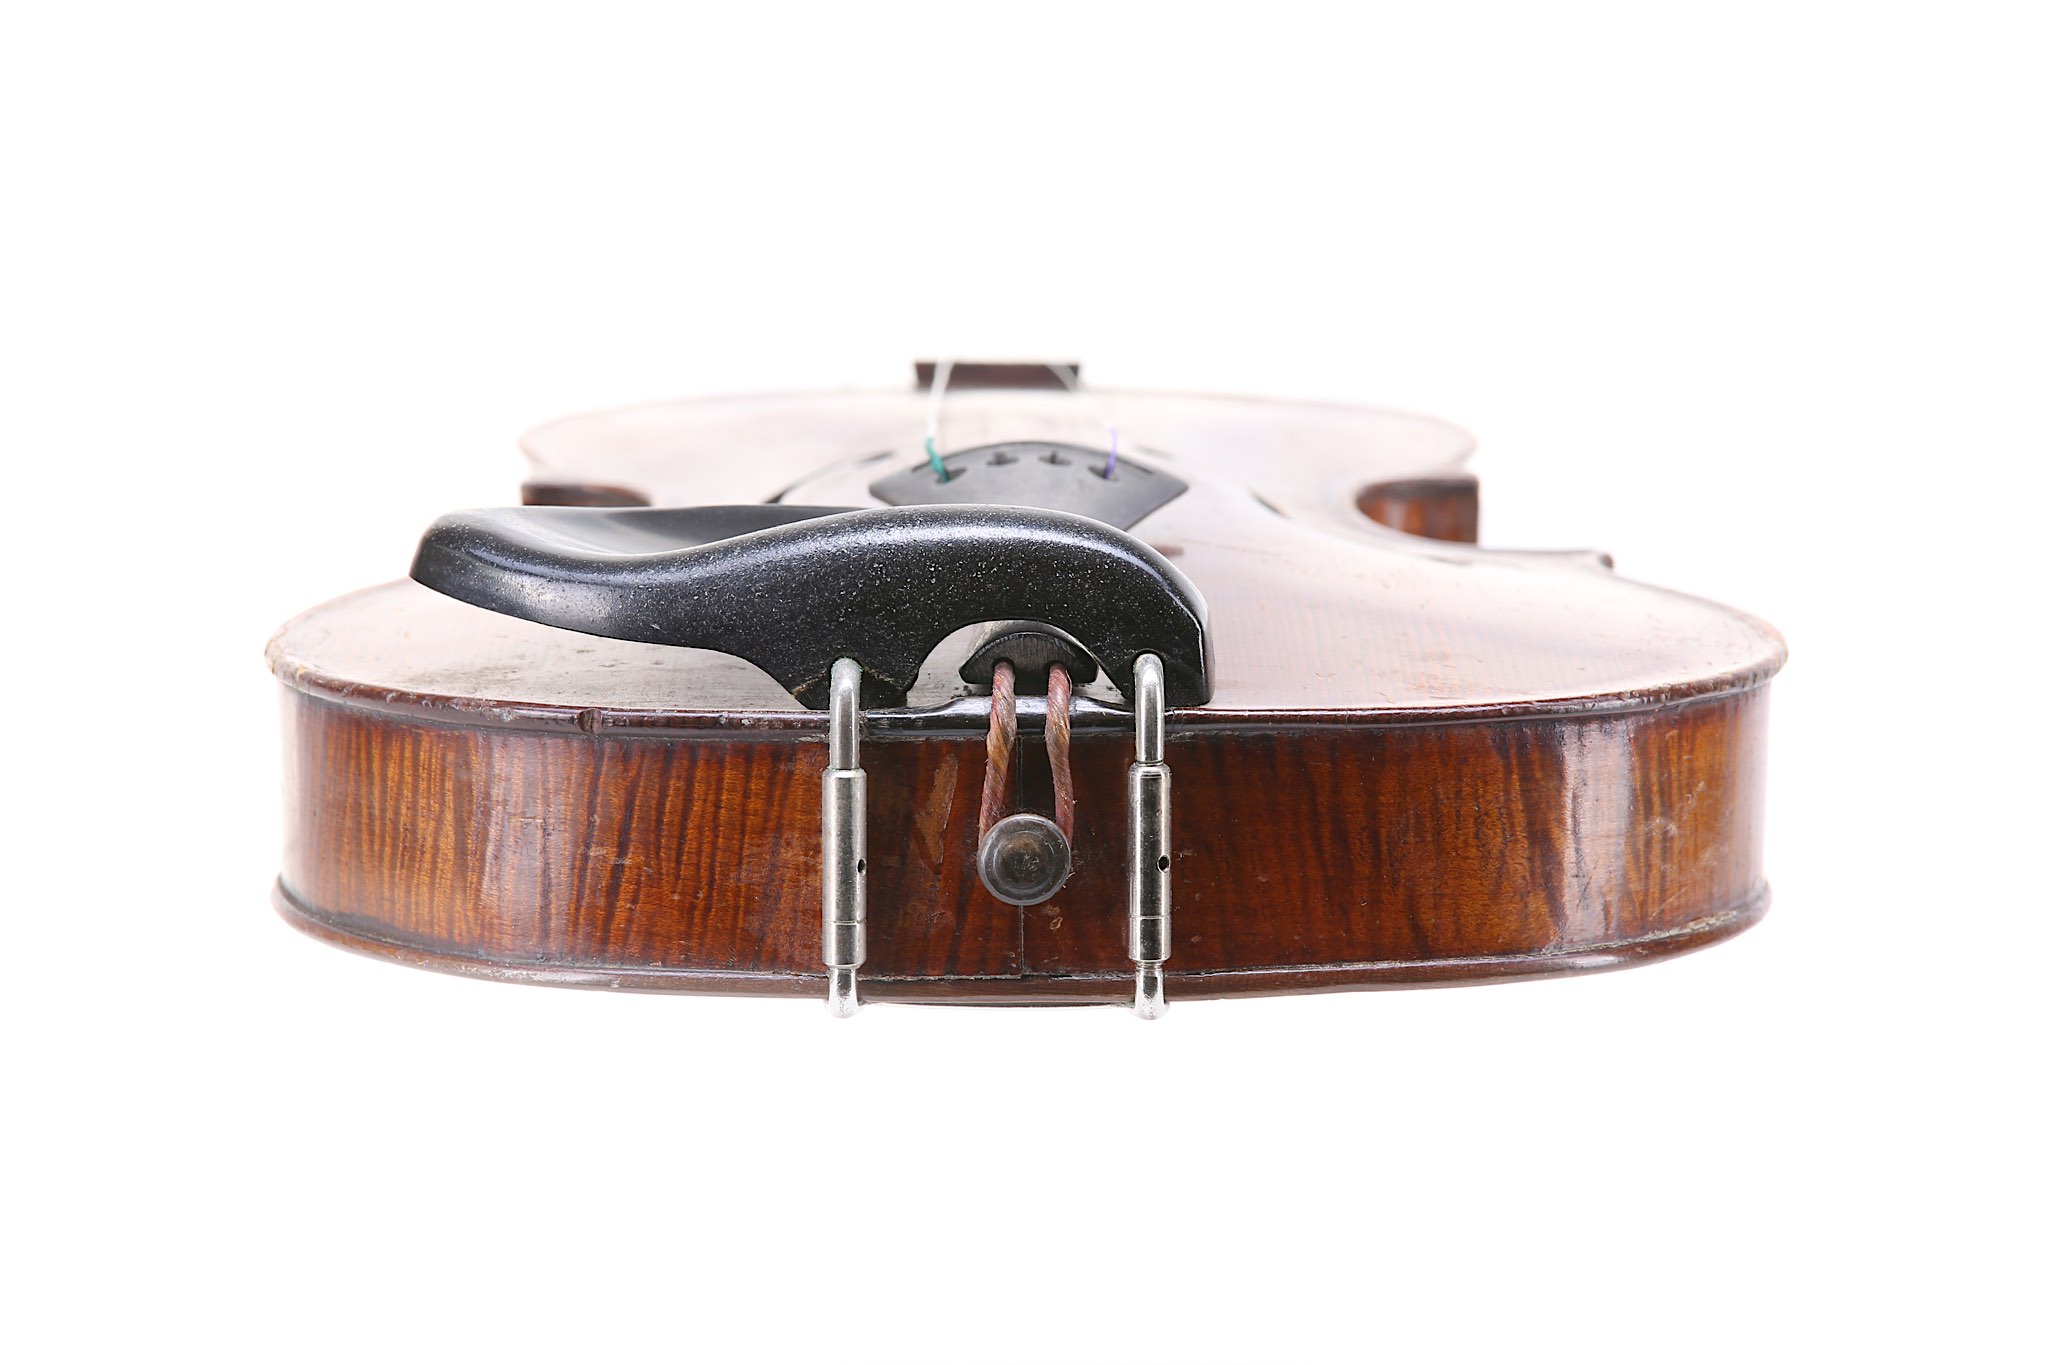 German violin. Early 20th century. No labelled. Two piece back ,medium figure flame maple wood, - Image 4 of 8